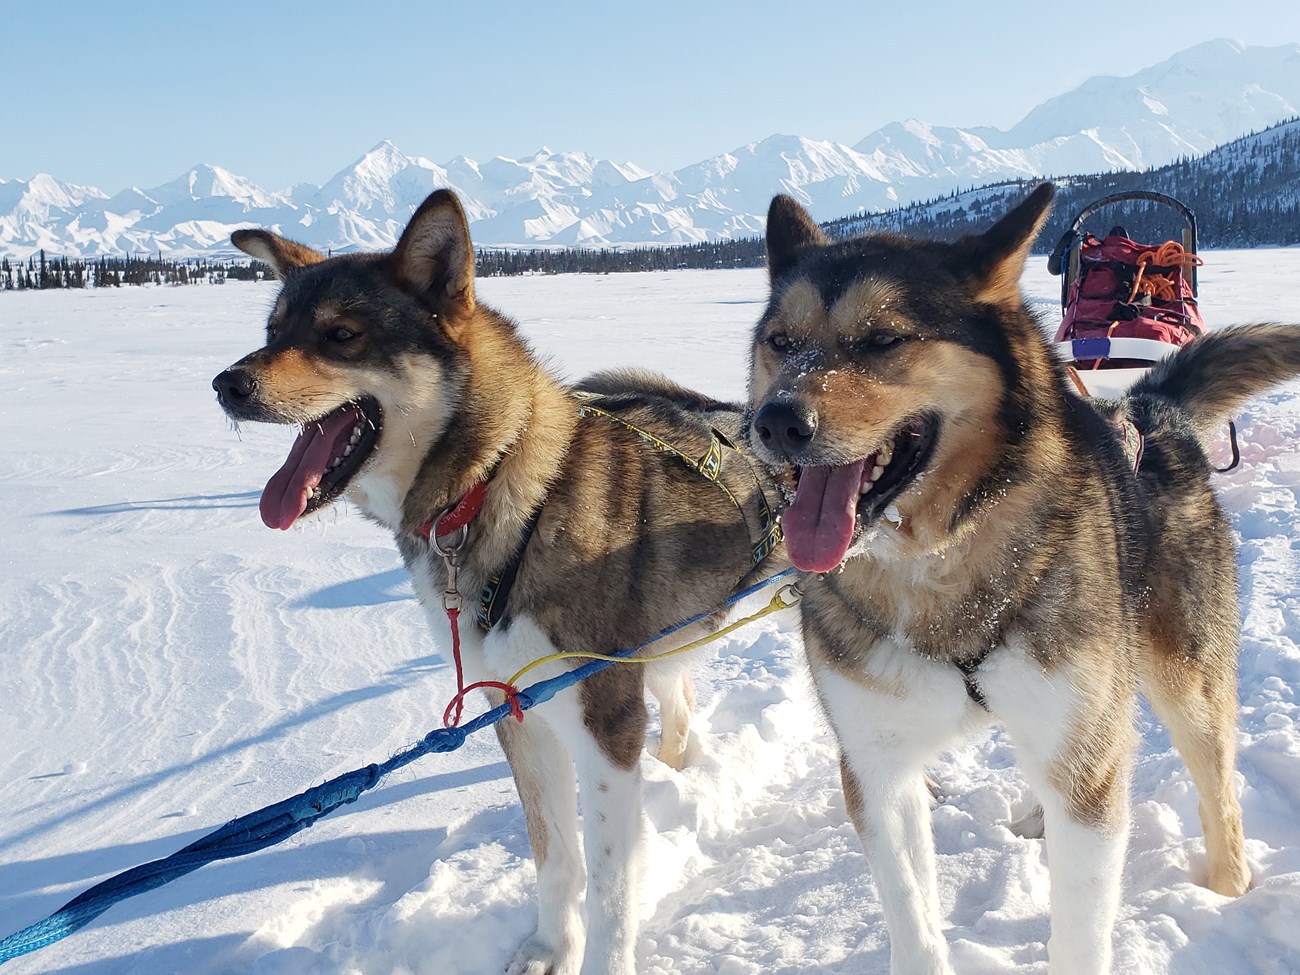 Two sled dogs hitched to a sled stand in a snow field. Behind them are snow-capped mountains.